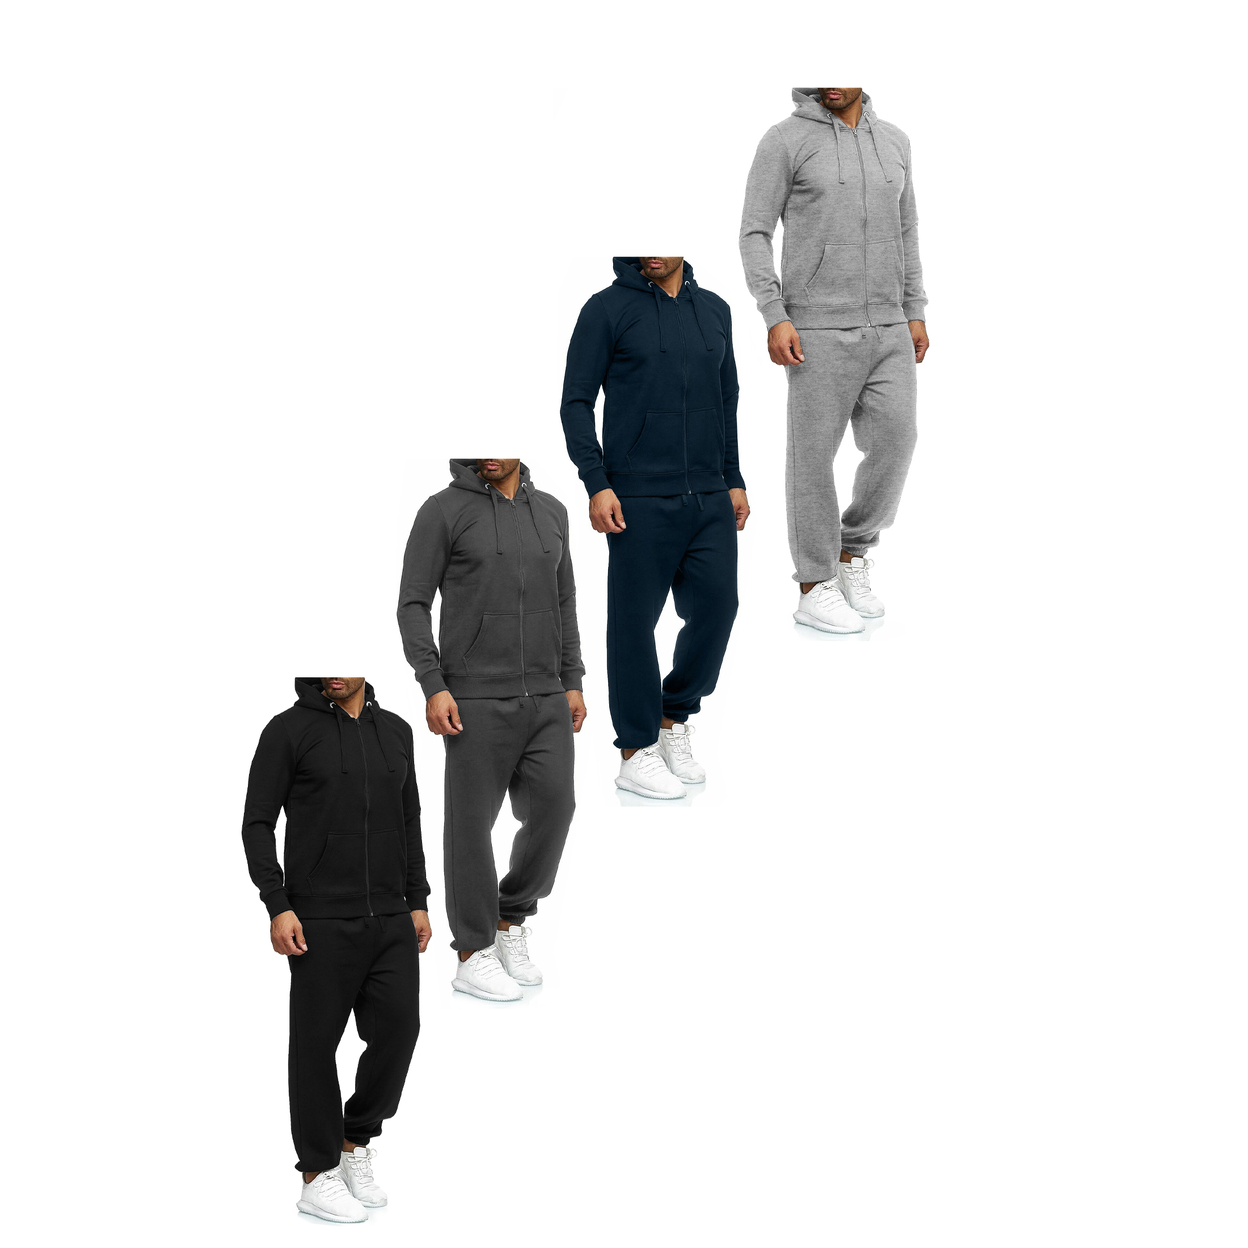 2-Pack: Men's Casual Big & Tall Athletic Active Winter Warm Fleece Lined Full Zip Tracksuit Jogger Set - Grey, Large